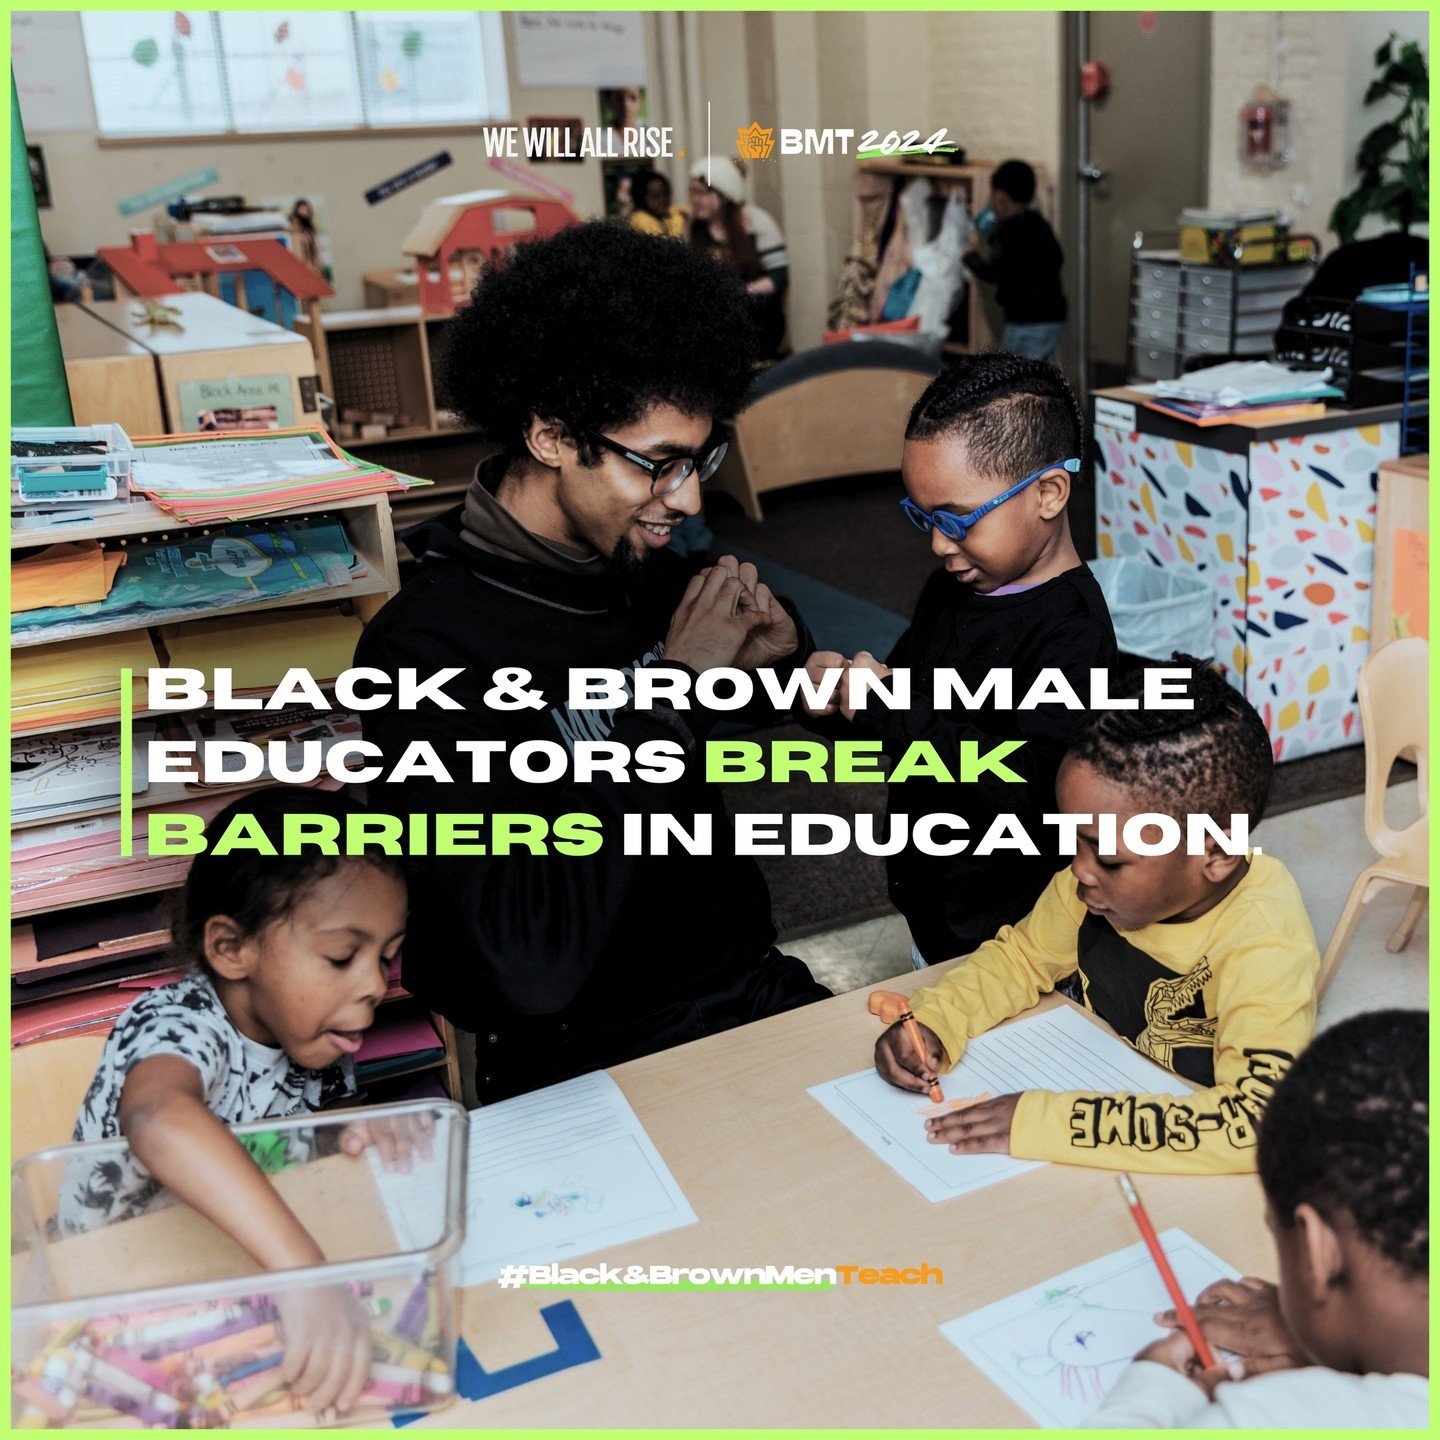 Our #BlackandBrownMenTeach campaign (#BMT2024), is a multiregional effort to raise awareness and promote increased representation of Black and Brown male educators in classrooms and schools. Help us spread the word and join the campaign to support Al